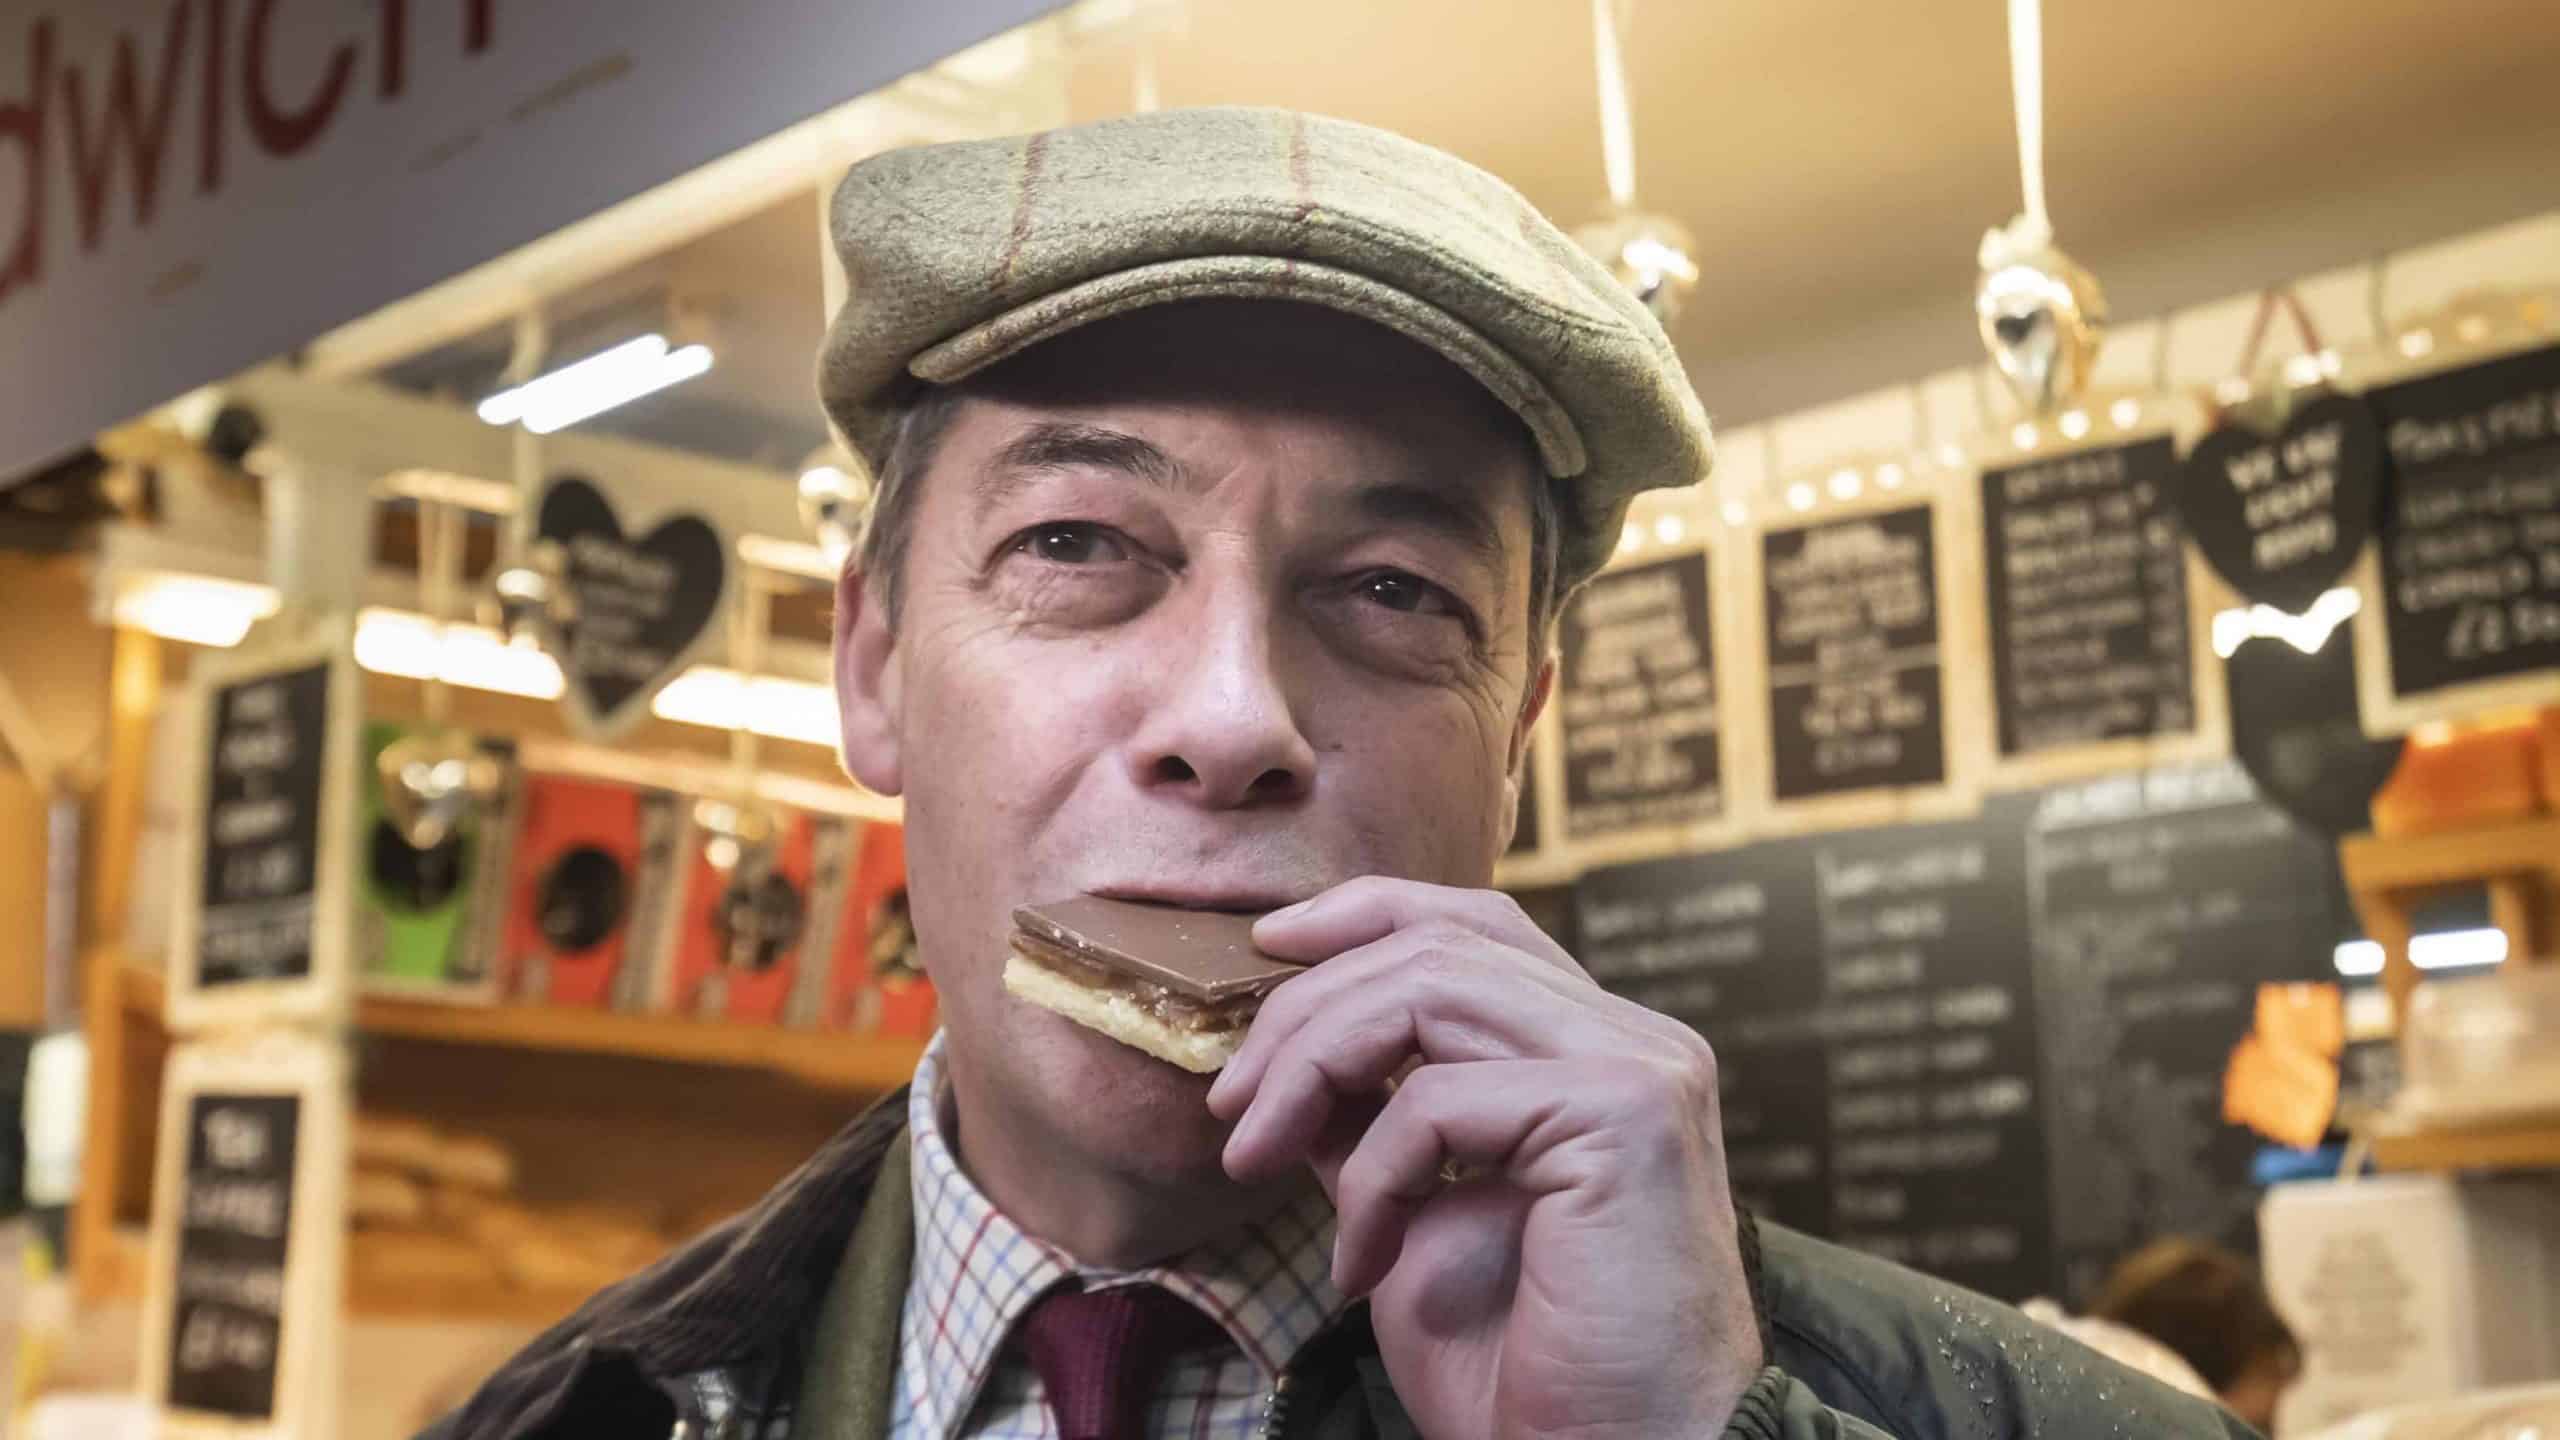 Farage visited by police after flouting lockdown rules